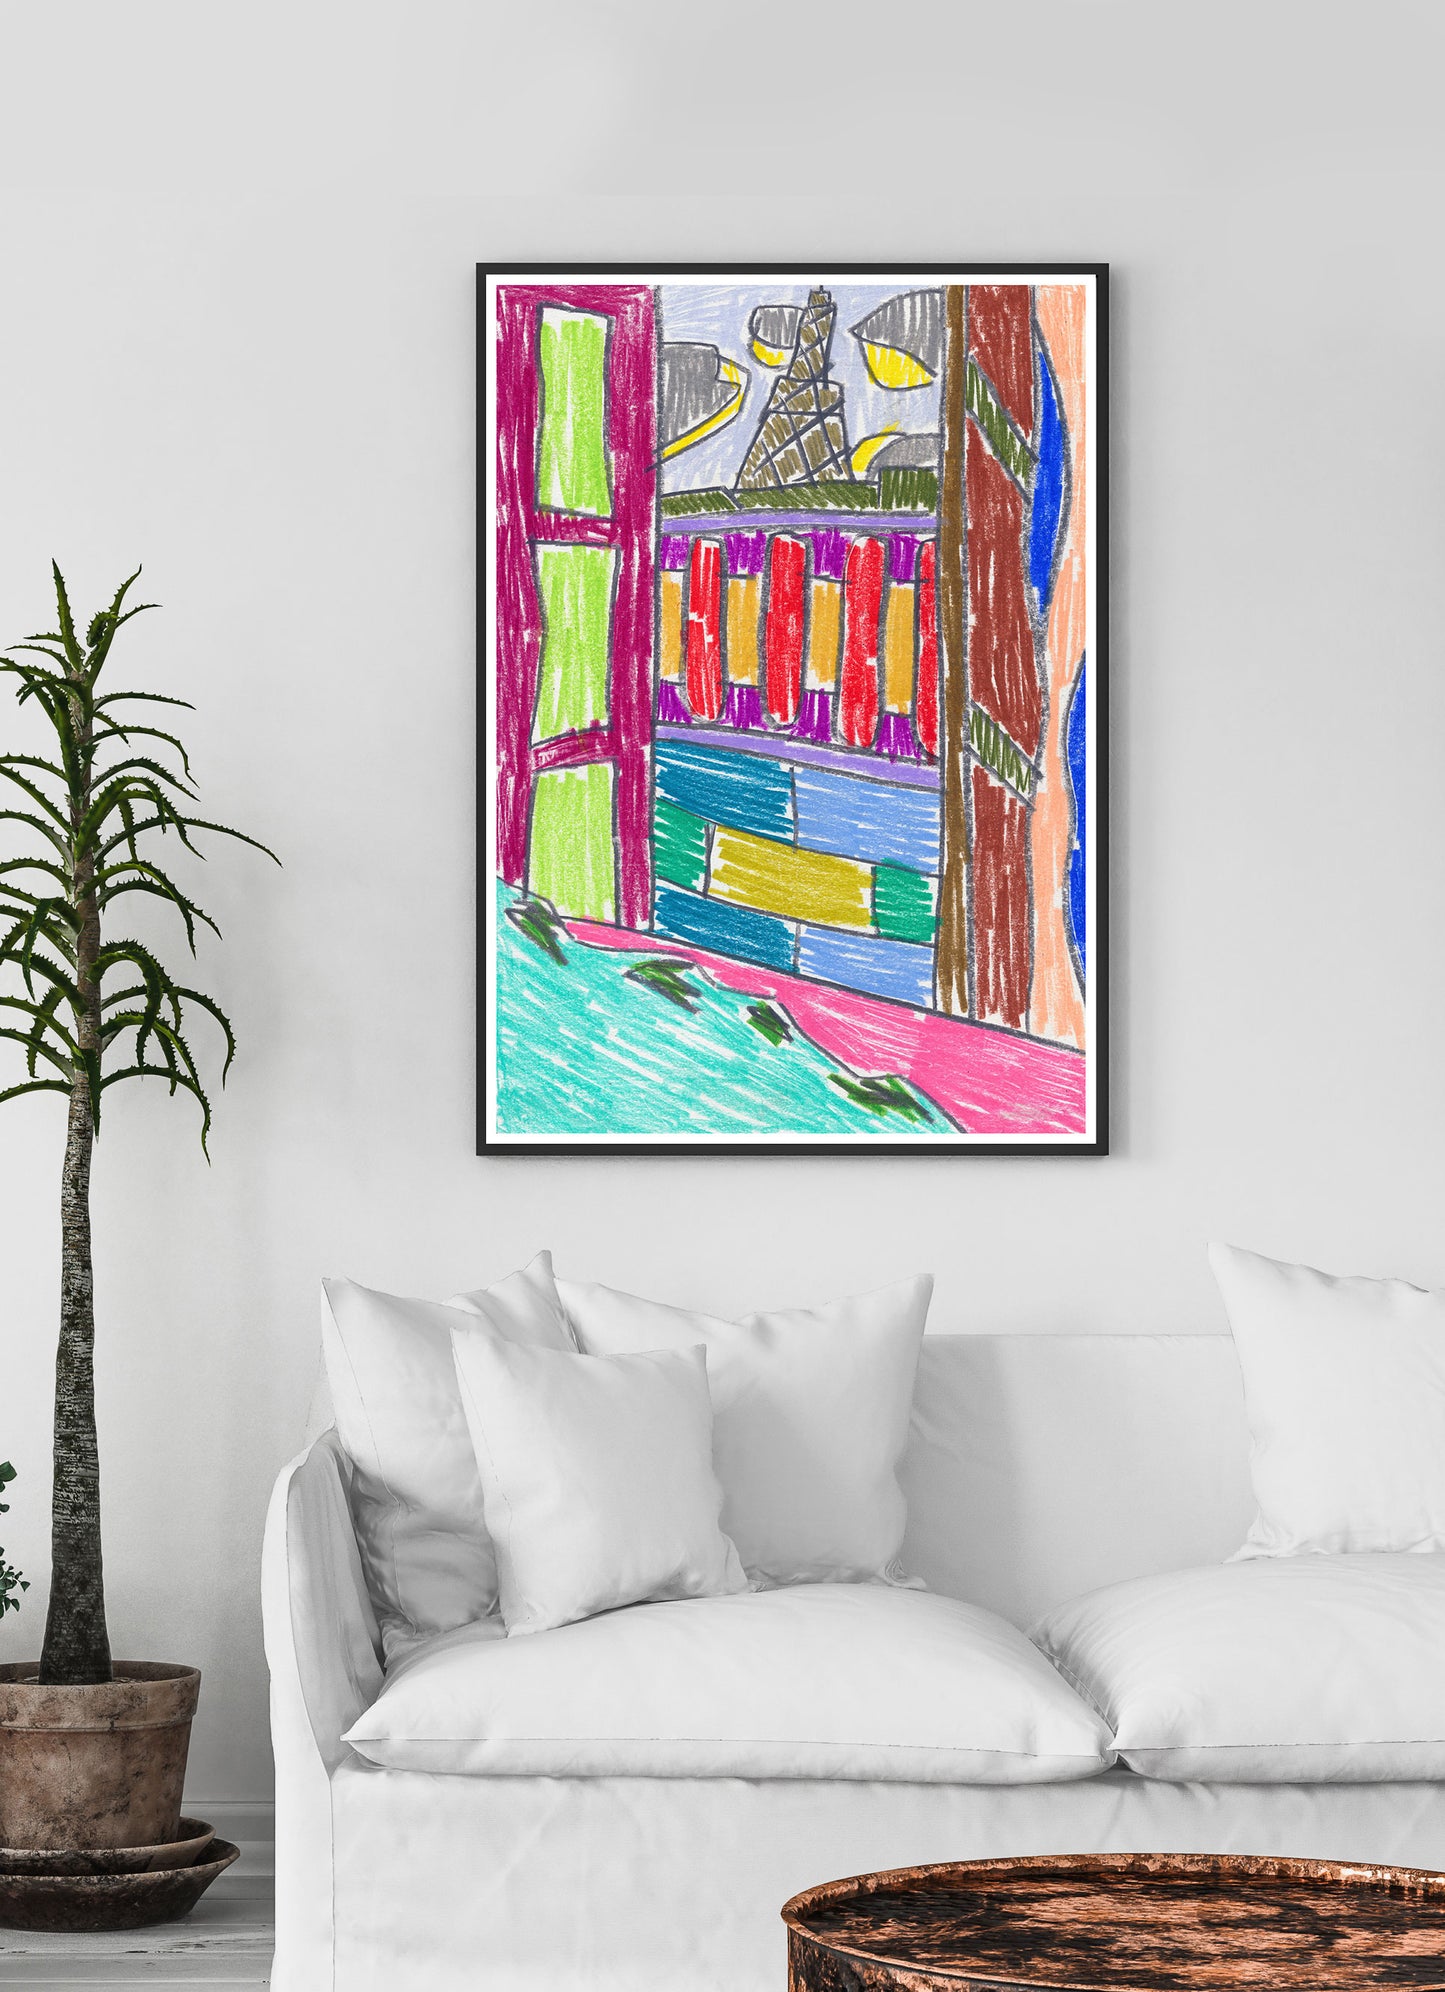 City VII Art Print in a traditional room interior